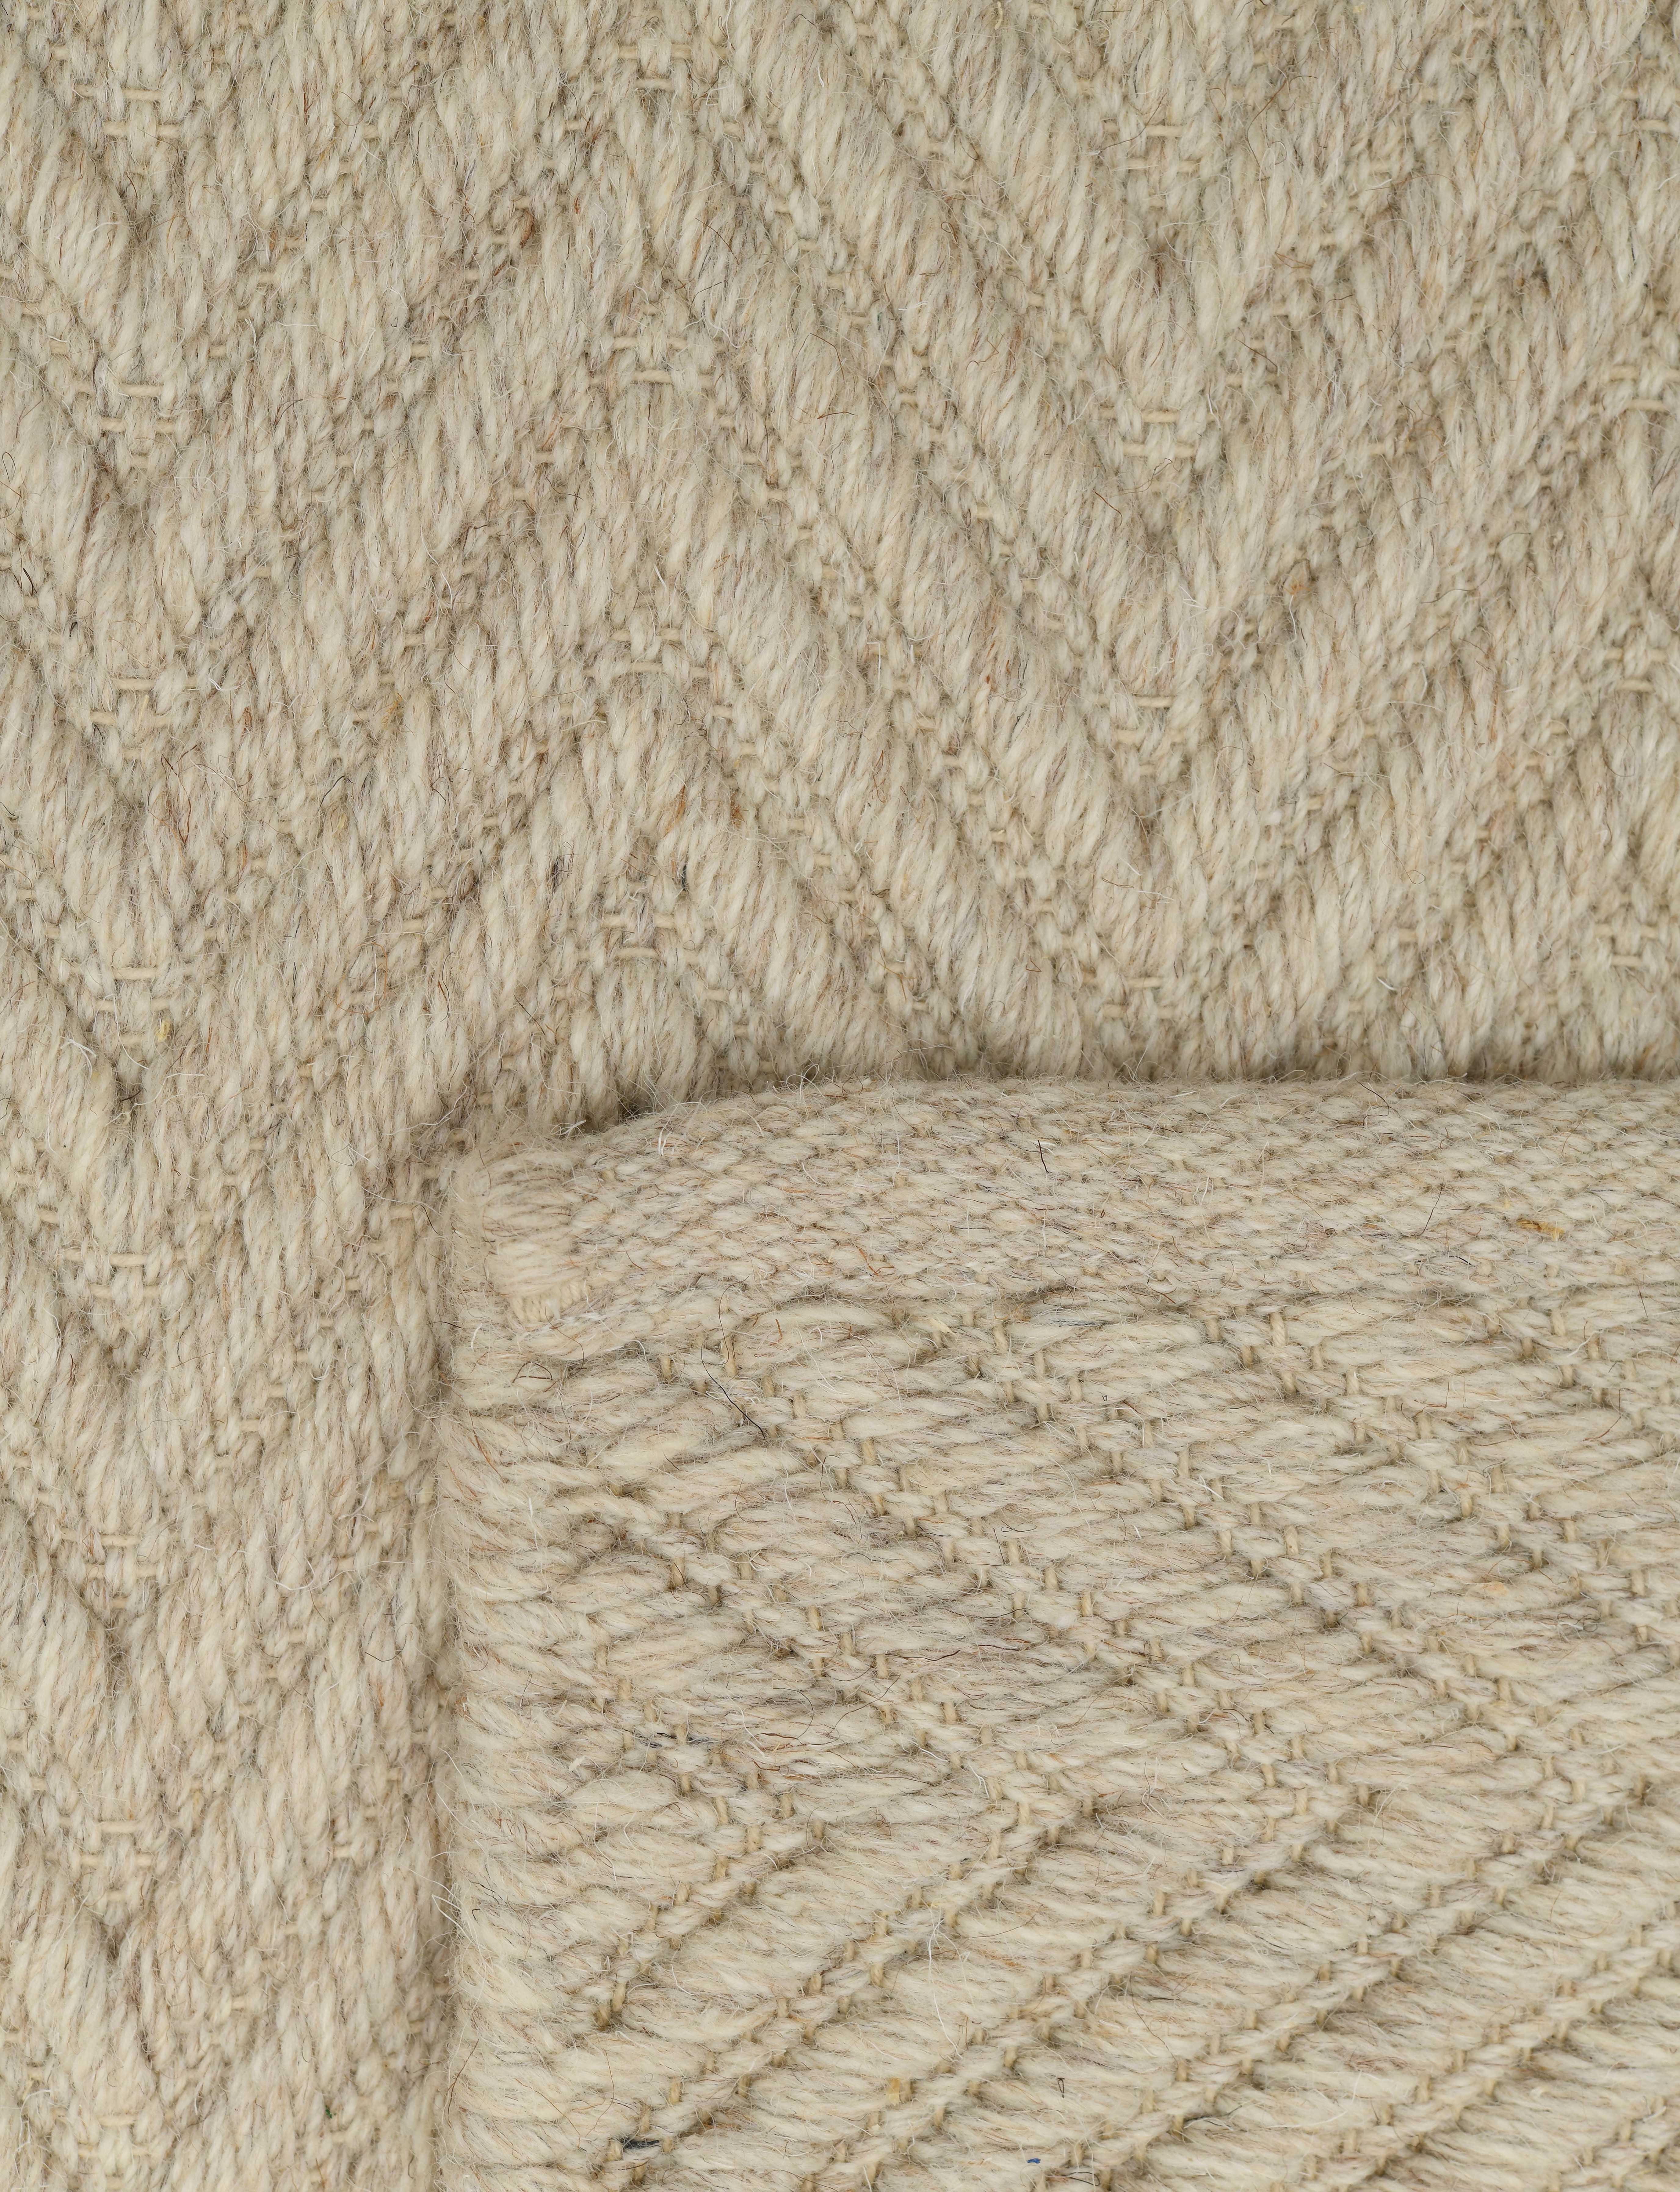 Hand-Woven Lanx, Beige, Handwoven Face 60% Undyed NZ Wool, 40% Undyed MED Wool, 6' x 9' For Sale